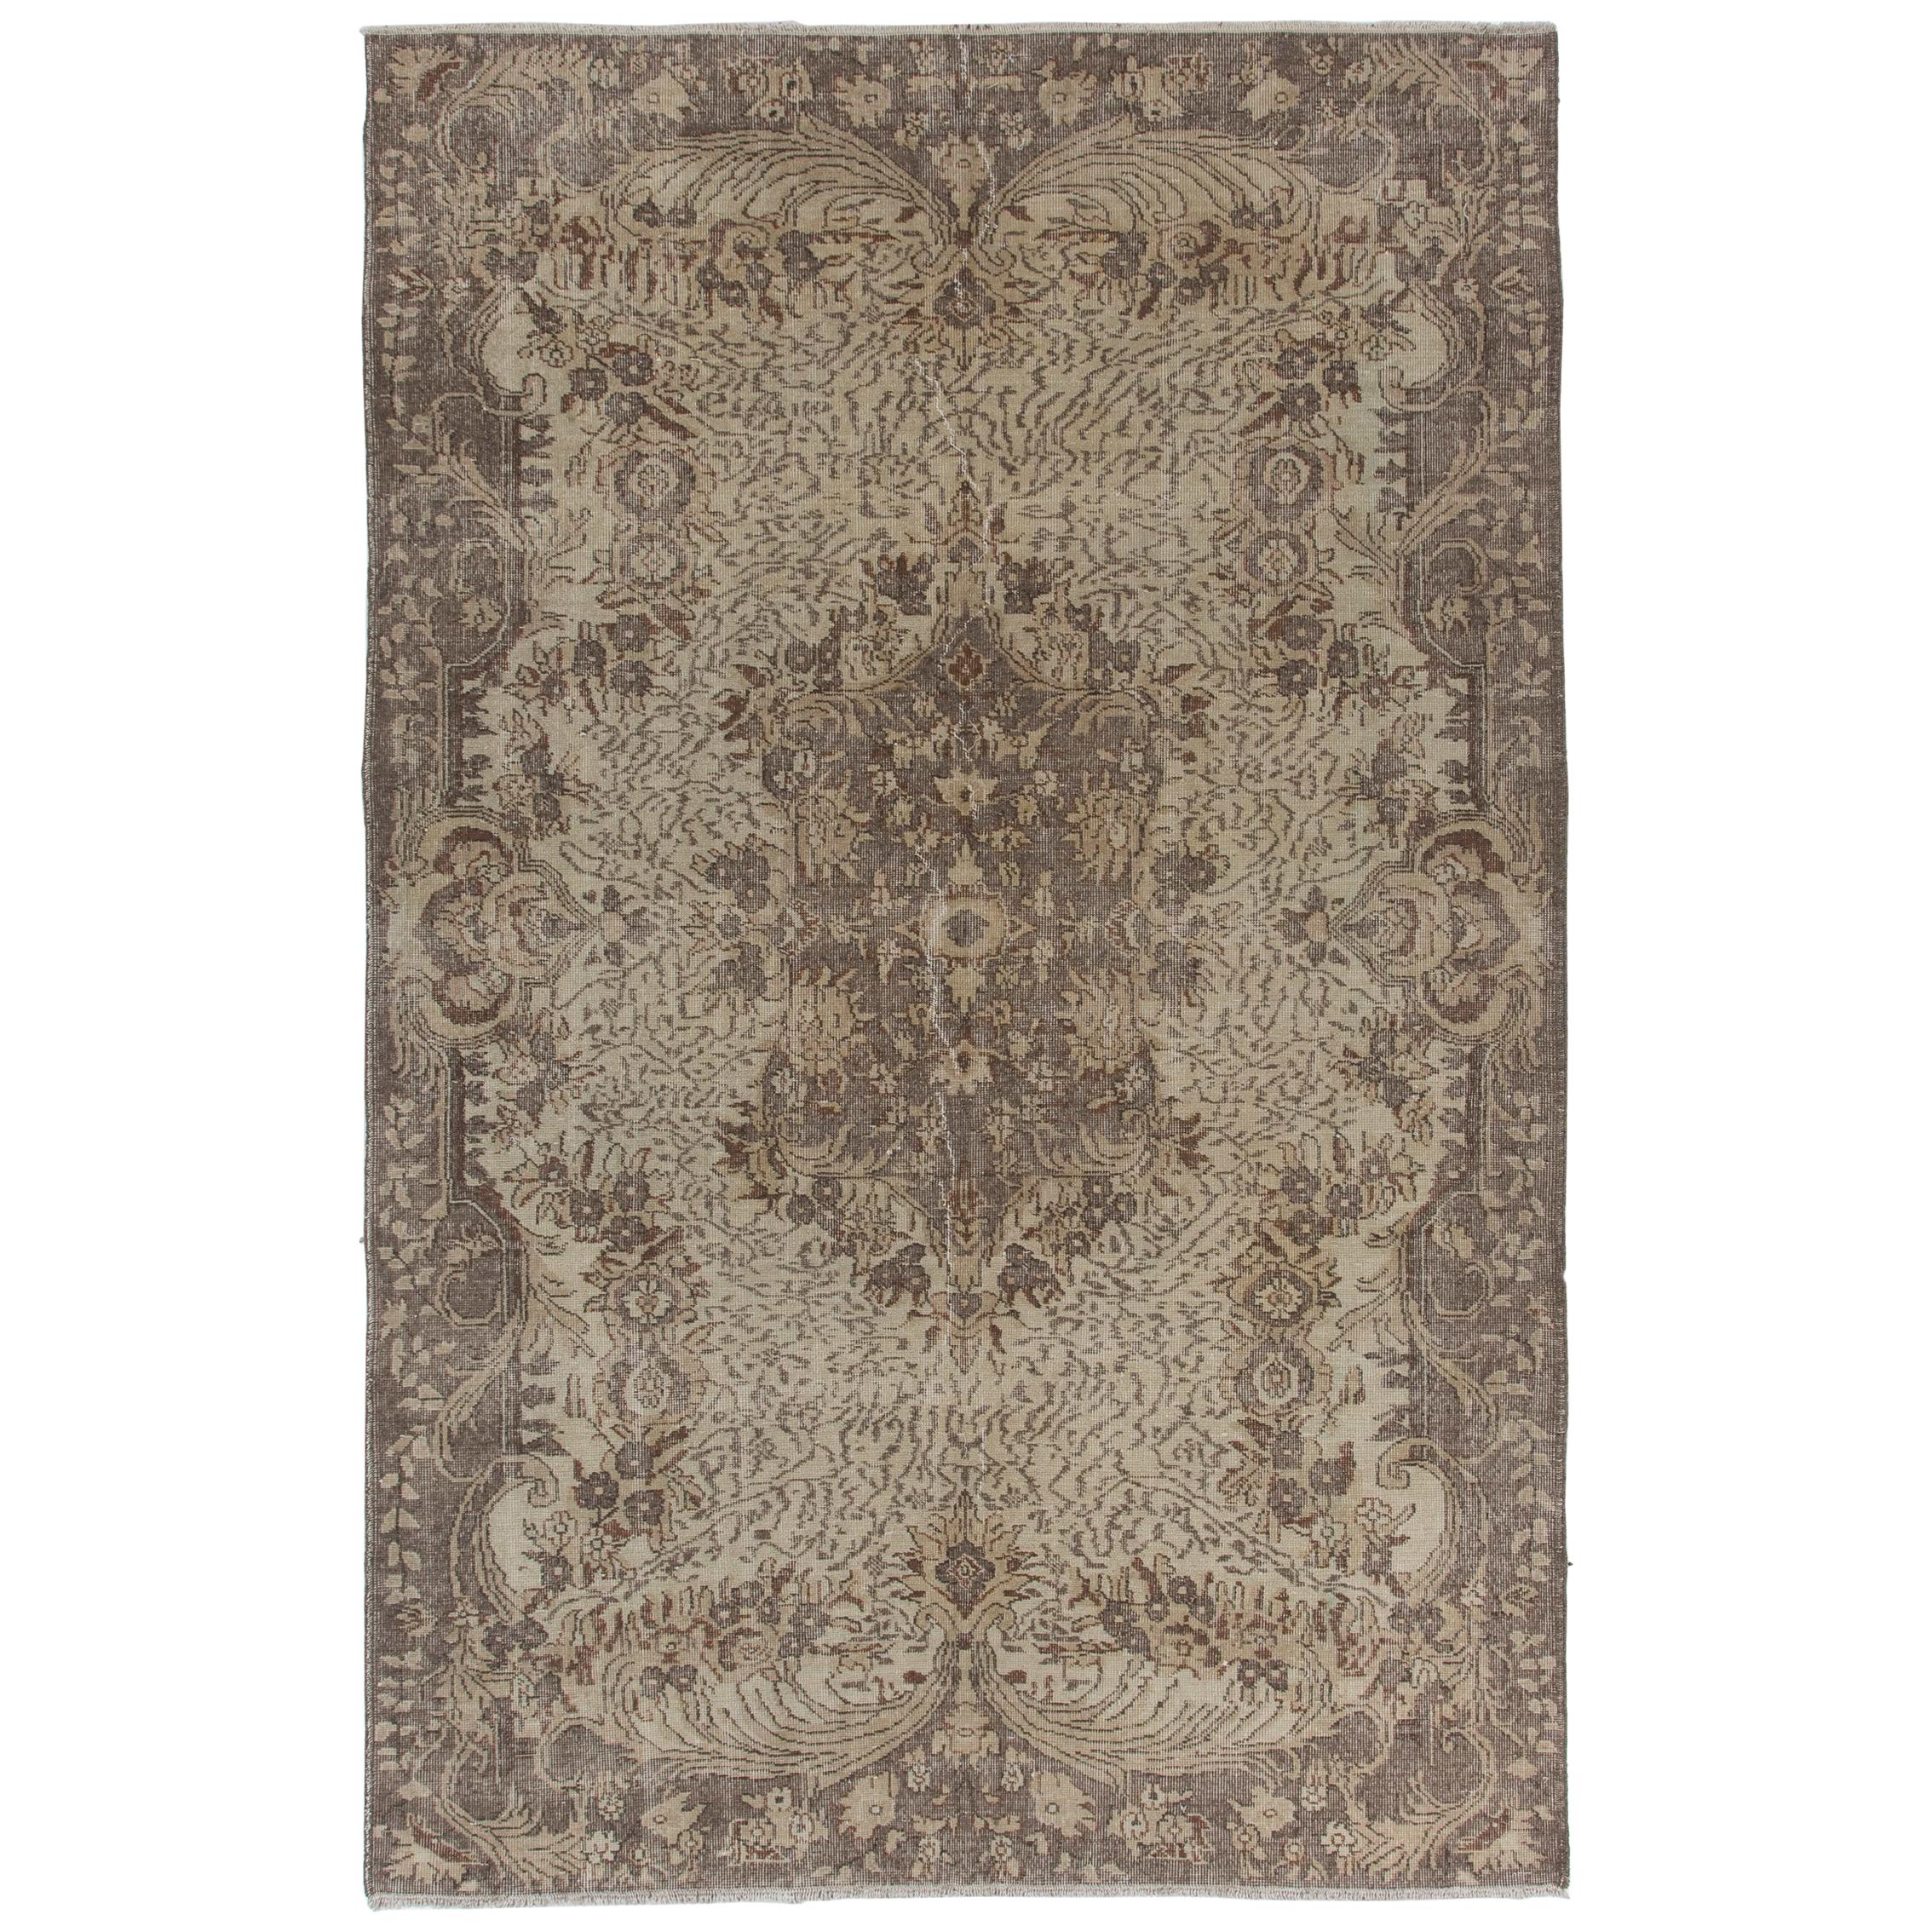 6.5x10 Ft Vintage Handmade Anatolian Wool Area Rug in Taupe and Beige For Sale